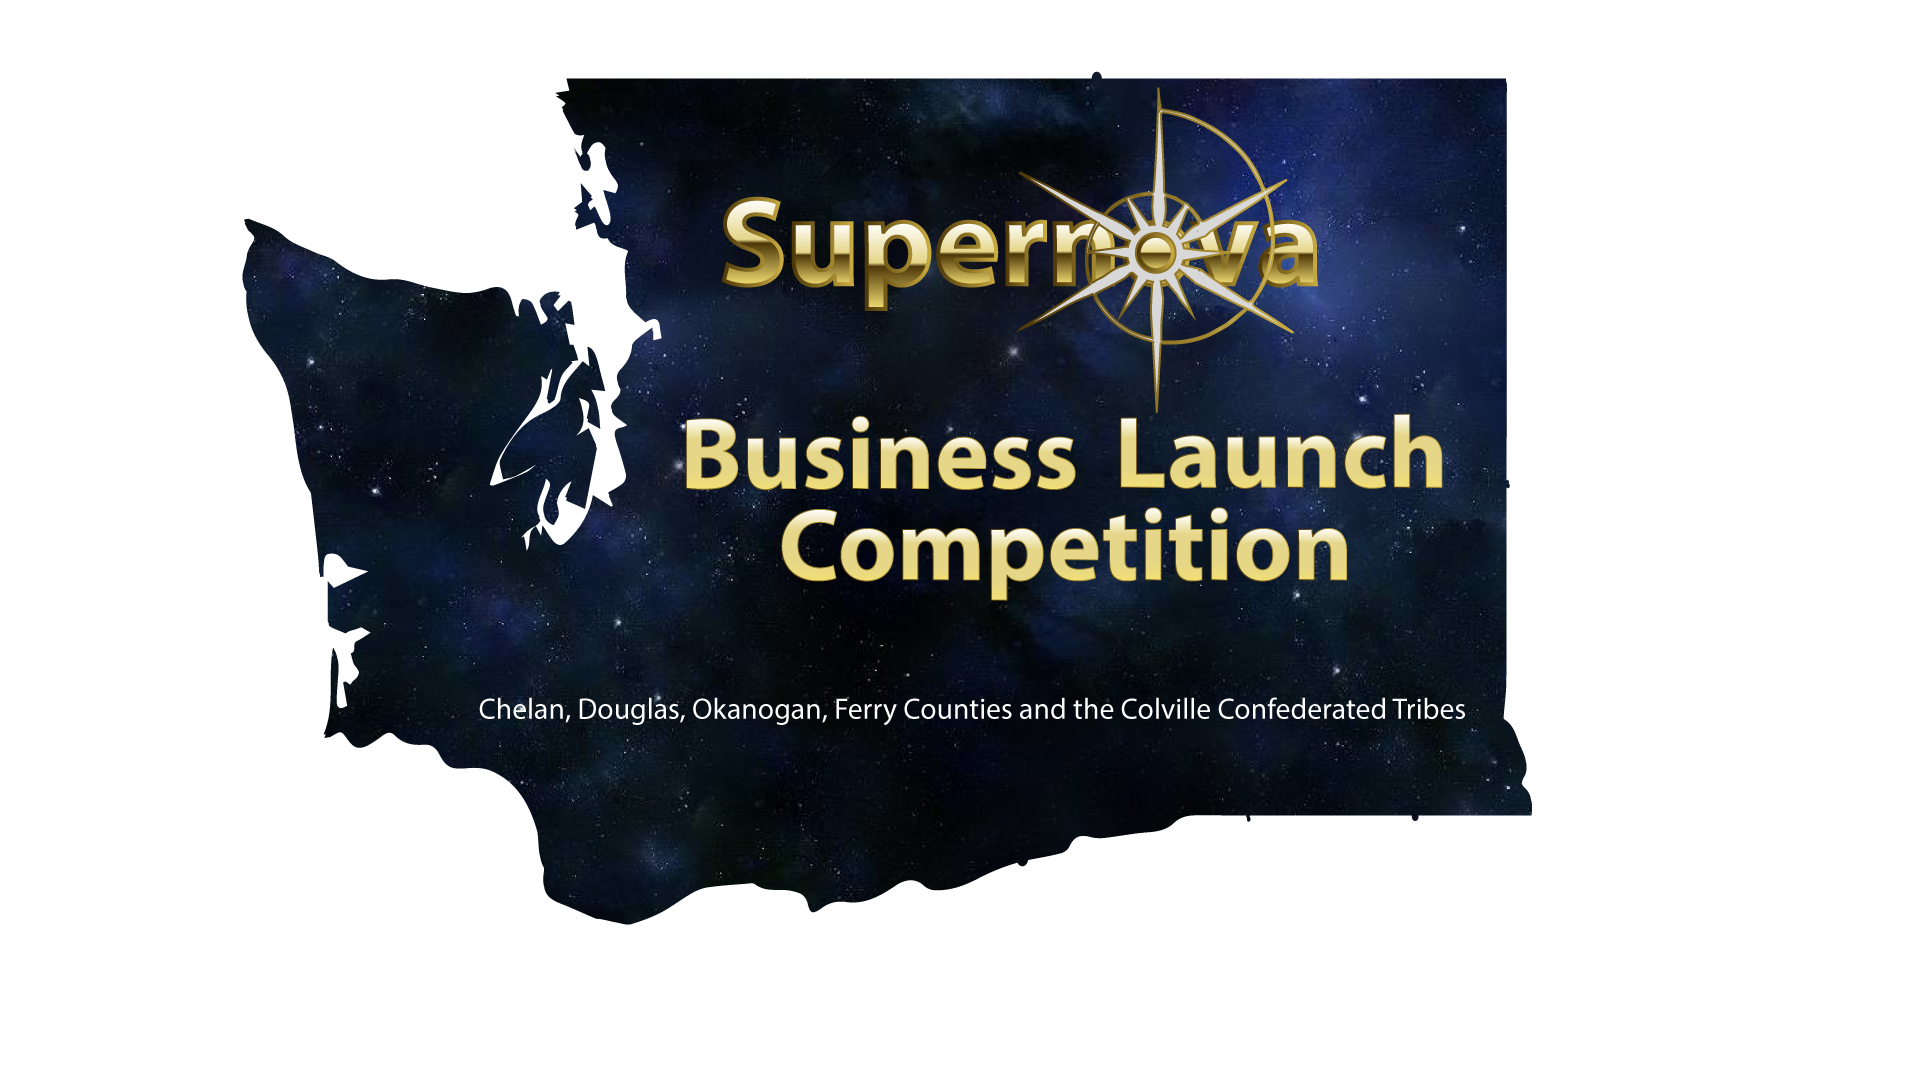 Supernova Business Launch Competition